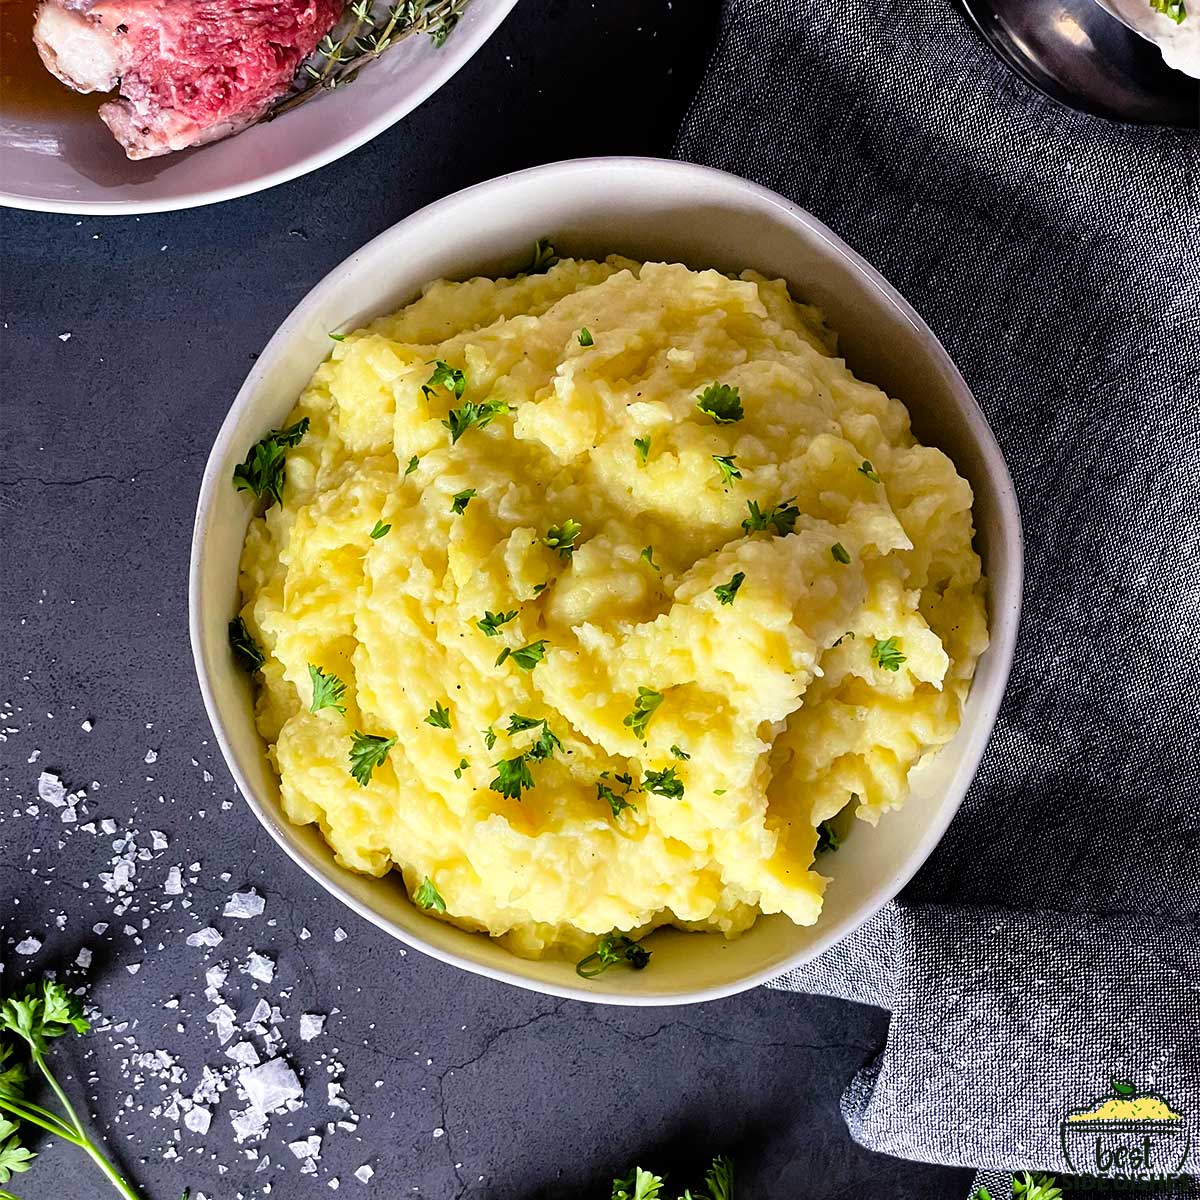 Creamy garlic mashed potatoes in a bowl with chives